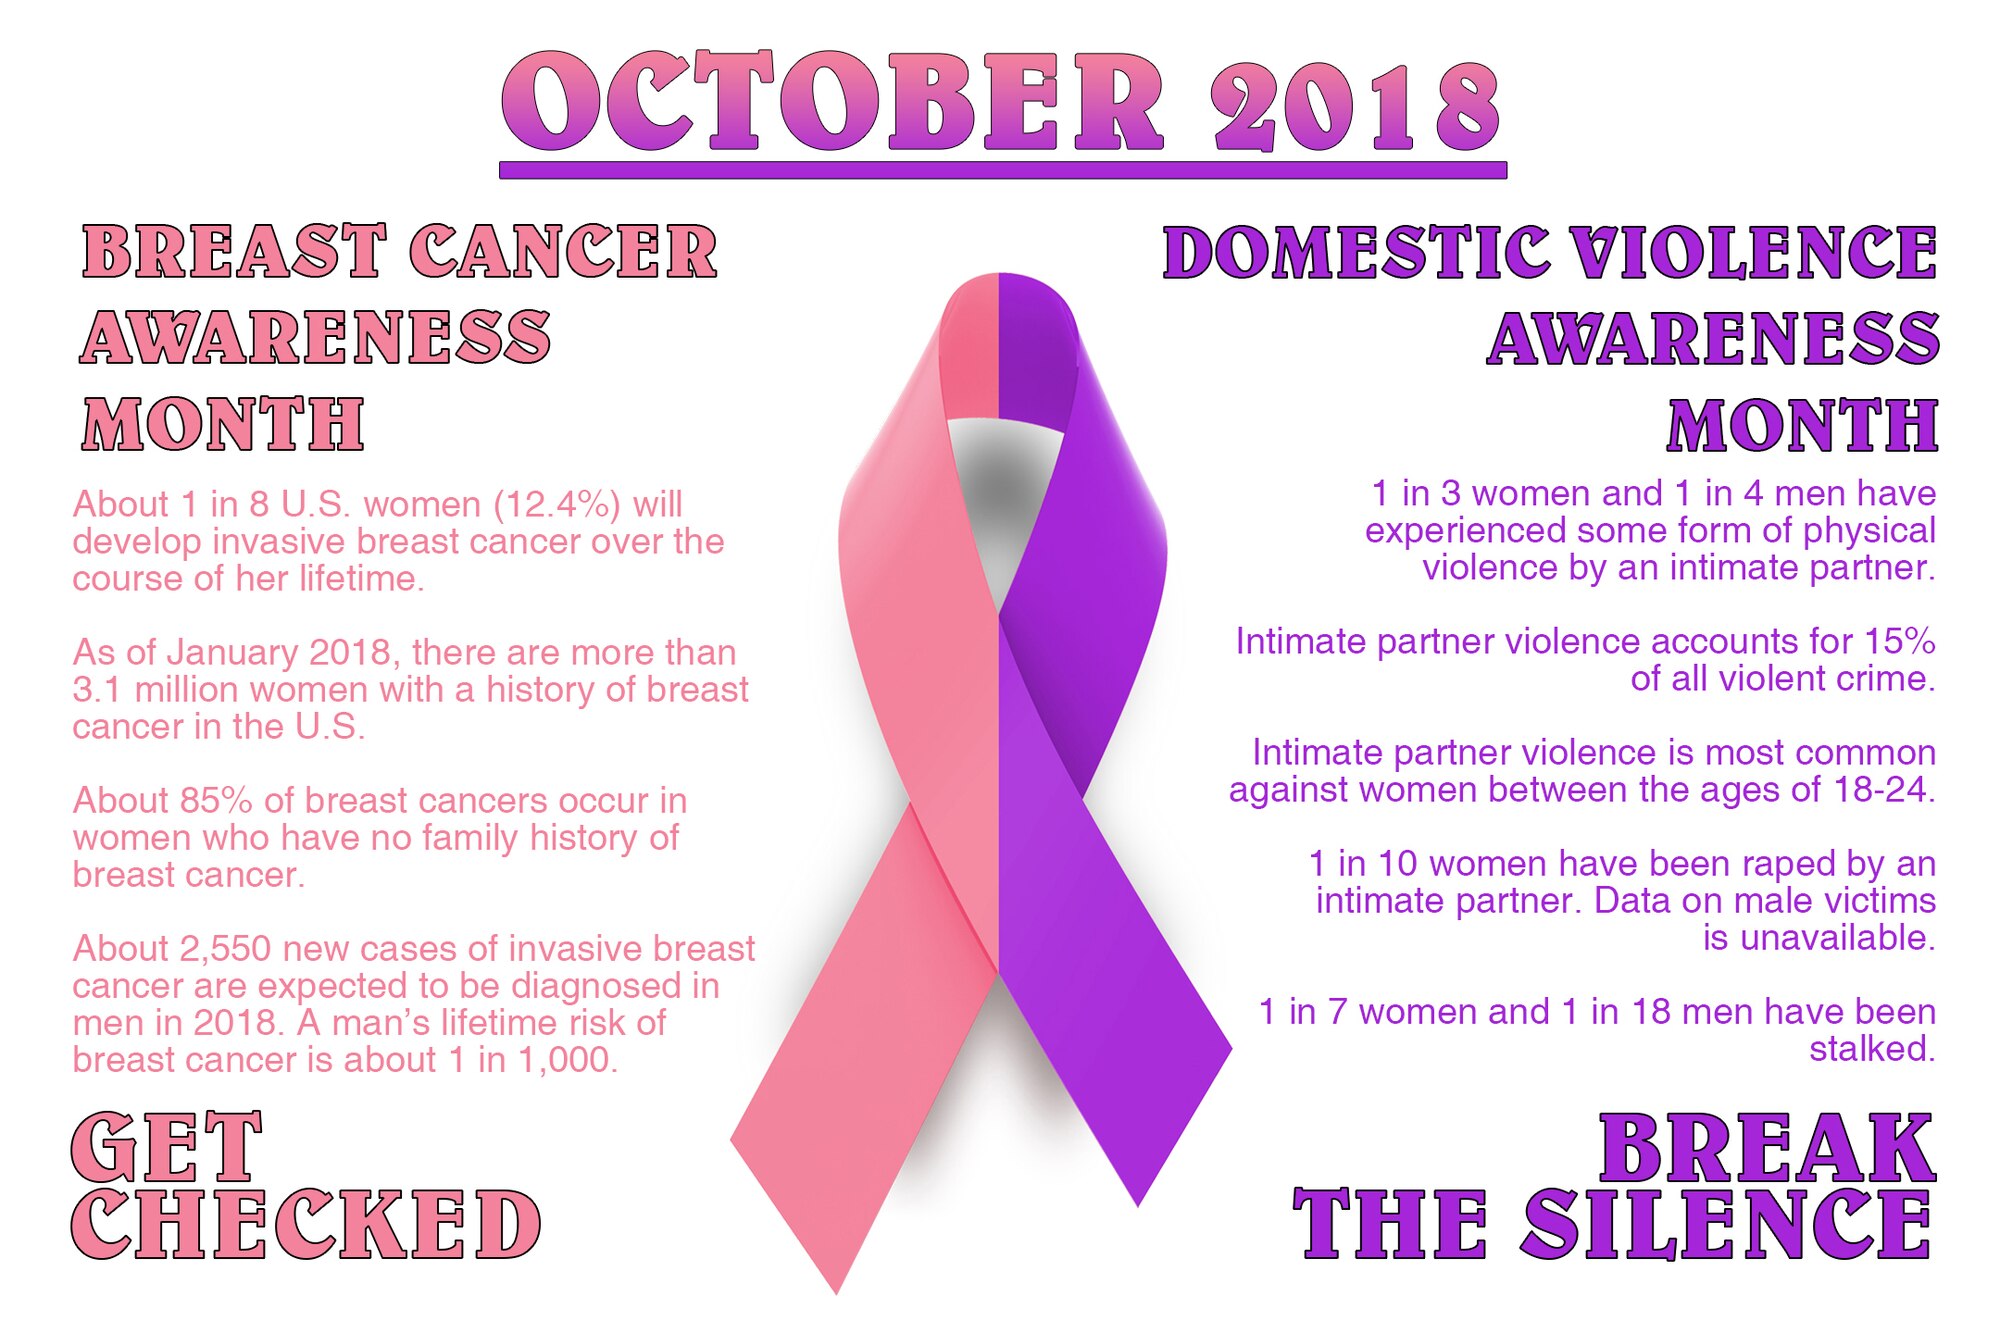 The month of October is dedicated to raising awareness for breast cancer and domestic violence. Normally thought to only affect women, breast cancer and domestic violence can happen to anyone regardless of age, gender, sexual orientation, race, religion or socio-economic status.